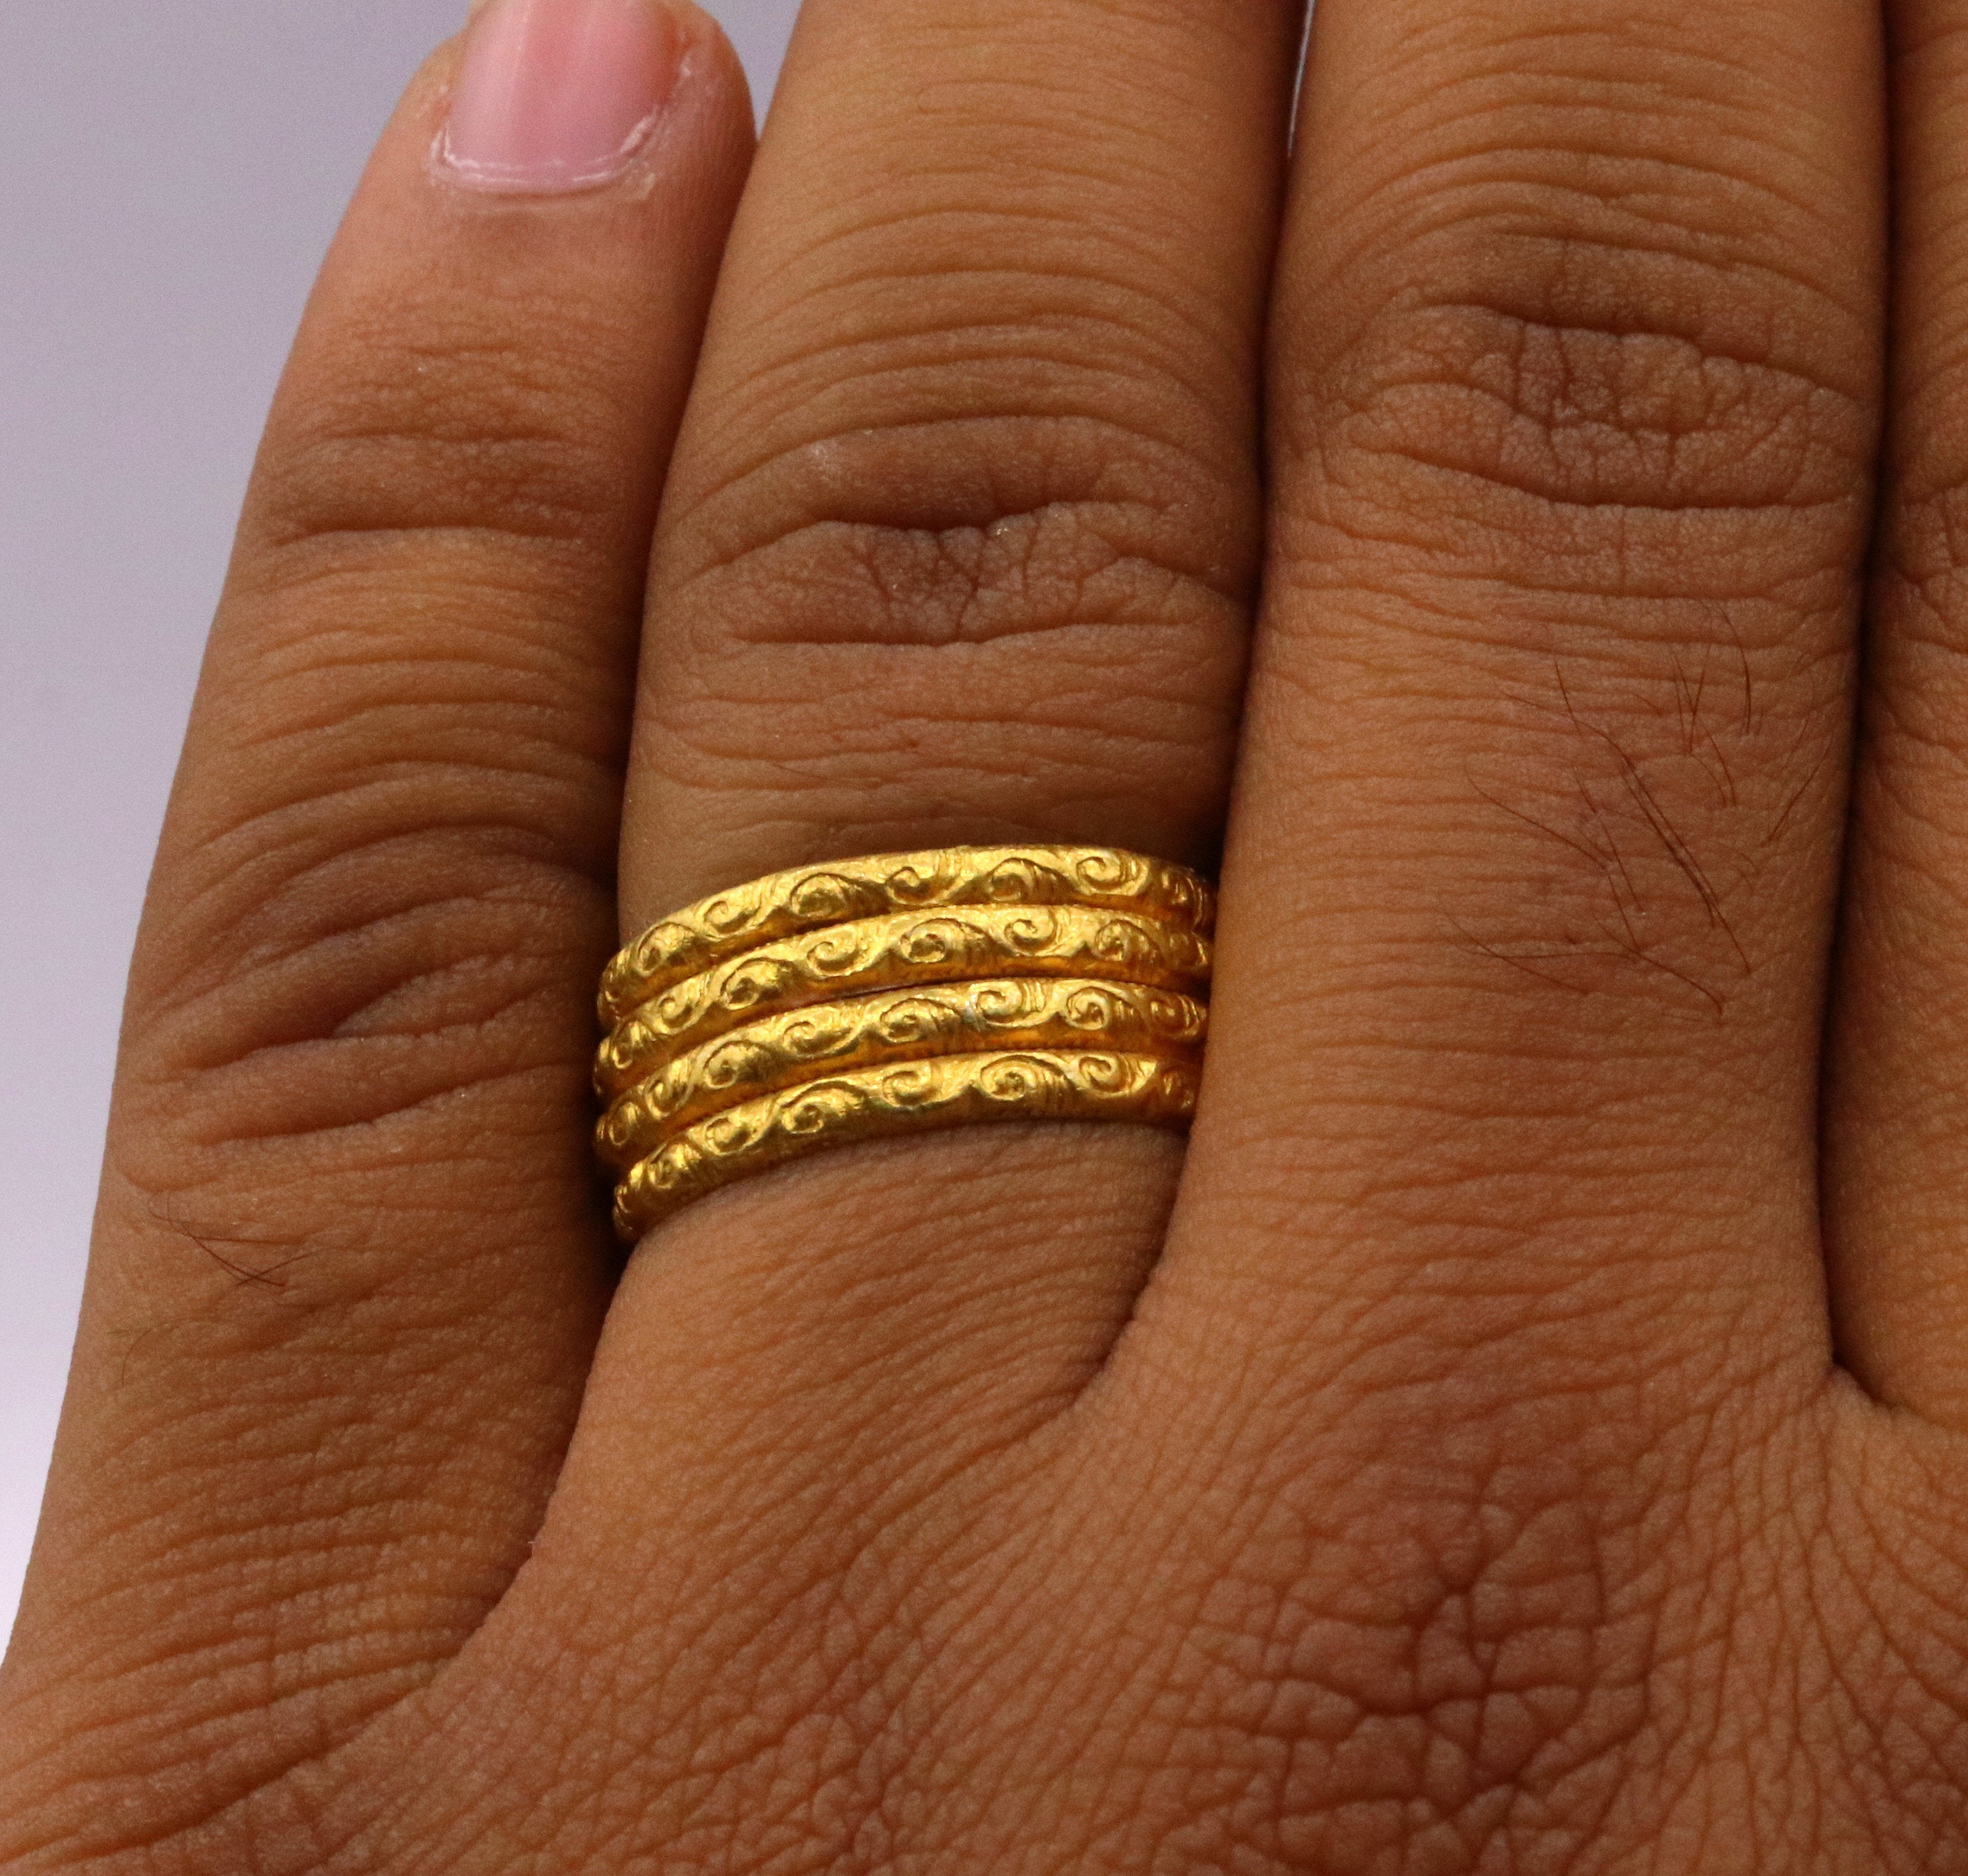 Buy Couple Rings Online | Couple Diamond & Gold Rings Designs @ Best Price